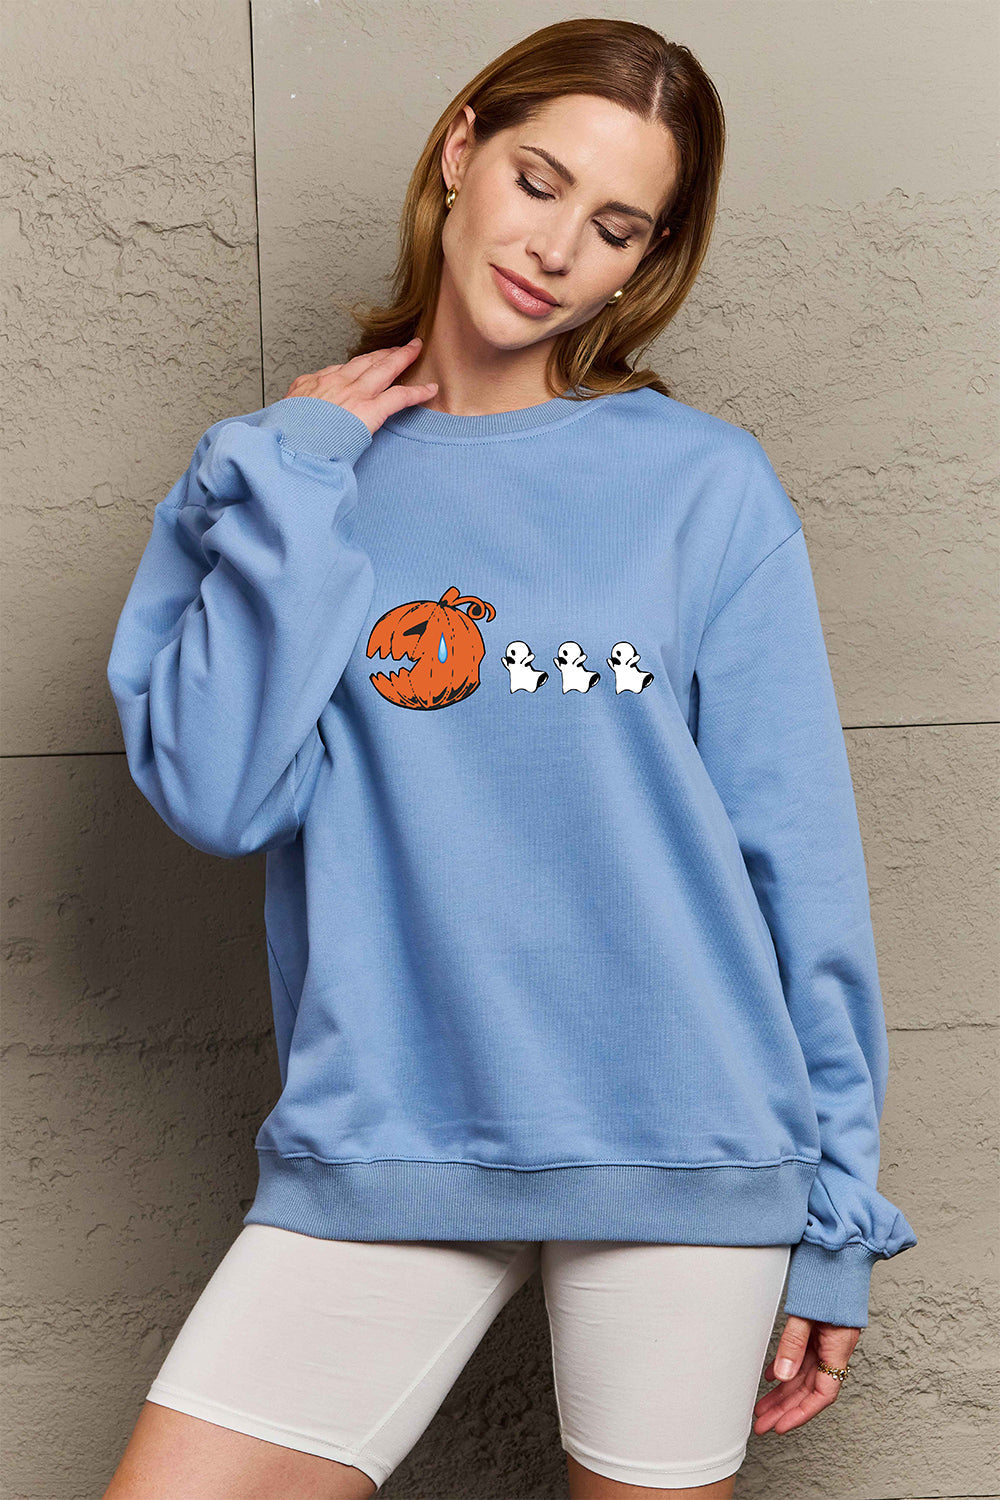 Simply Love Full Size Graphic Dropped Shoulder Sweatshirt BLUE ZONE PLANET